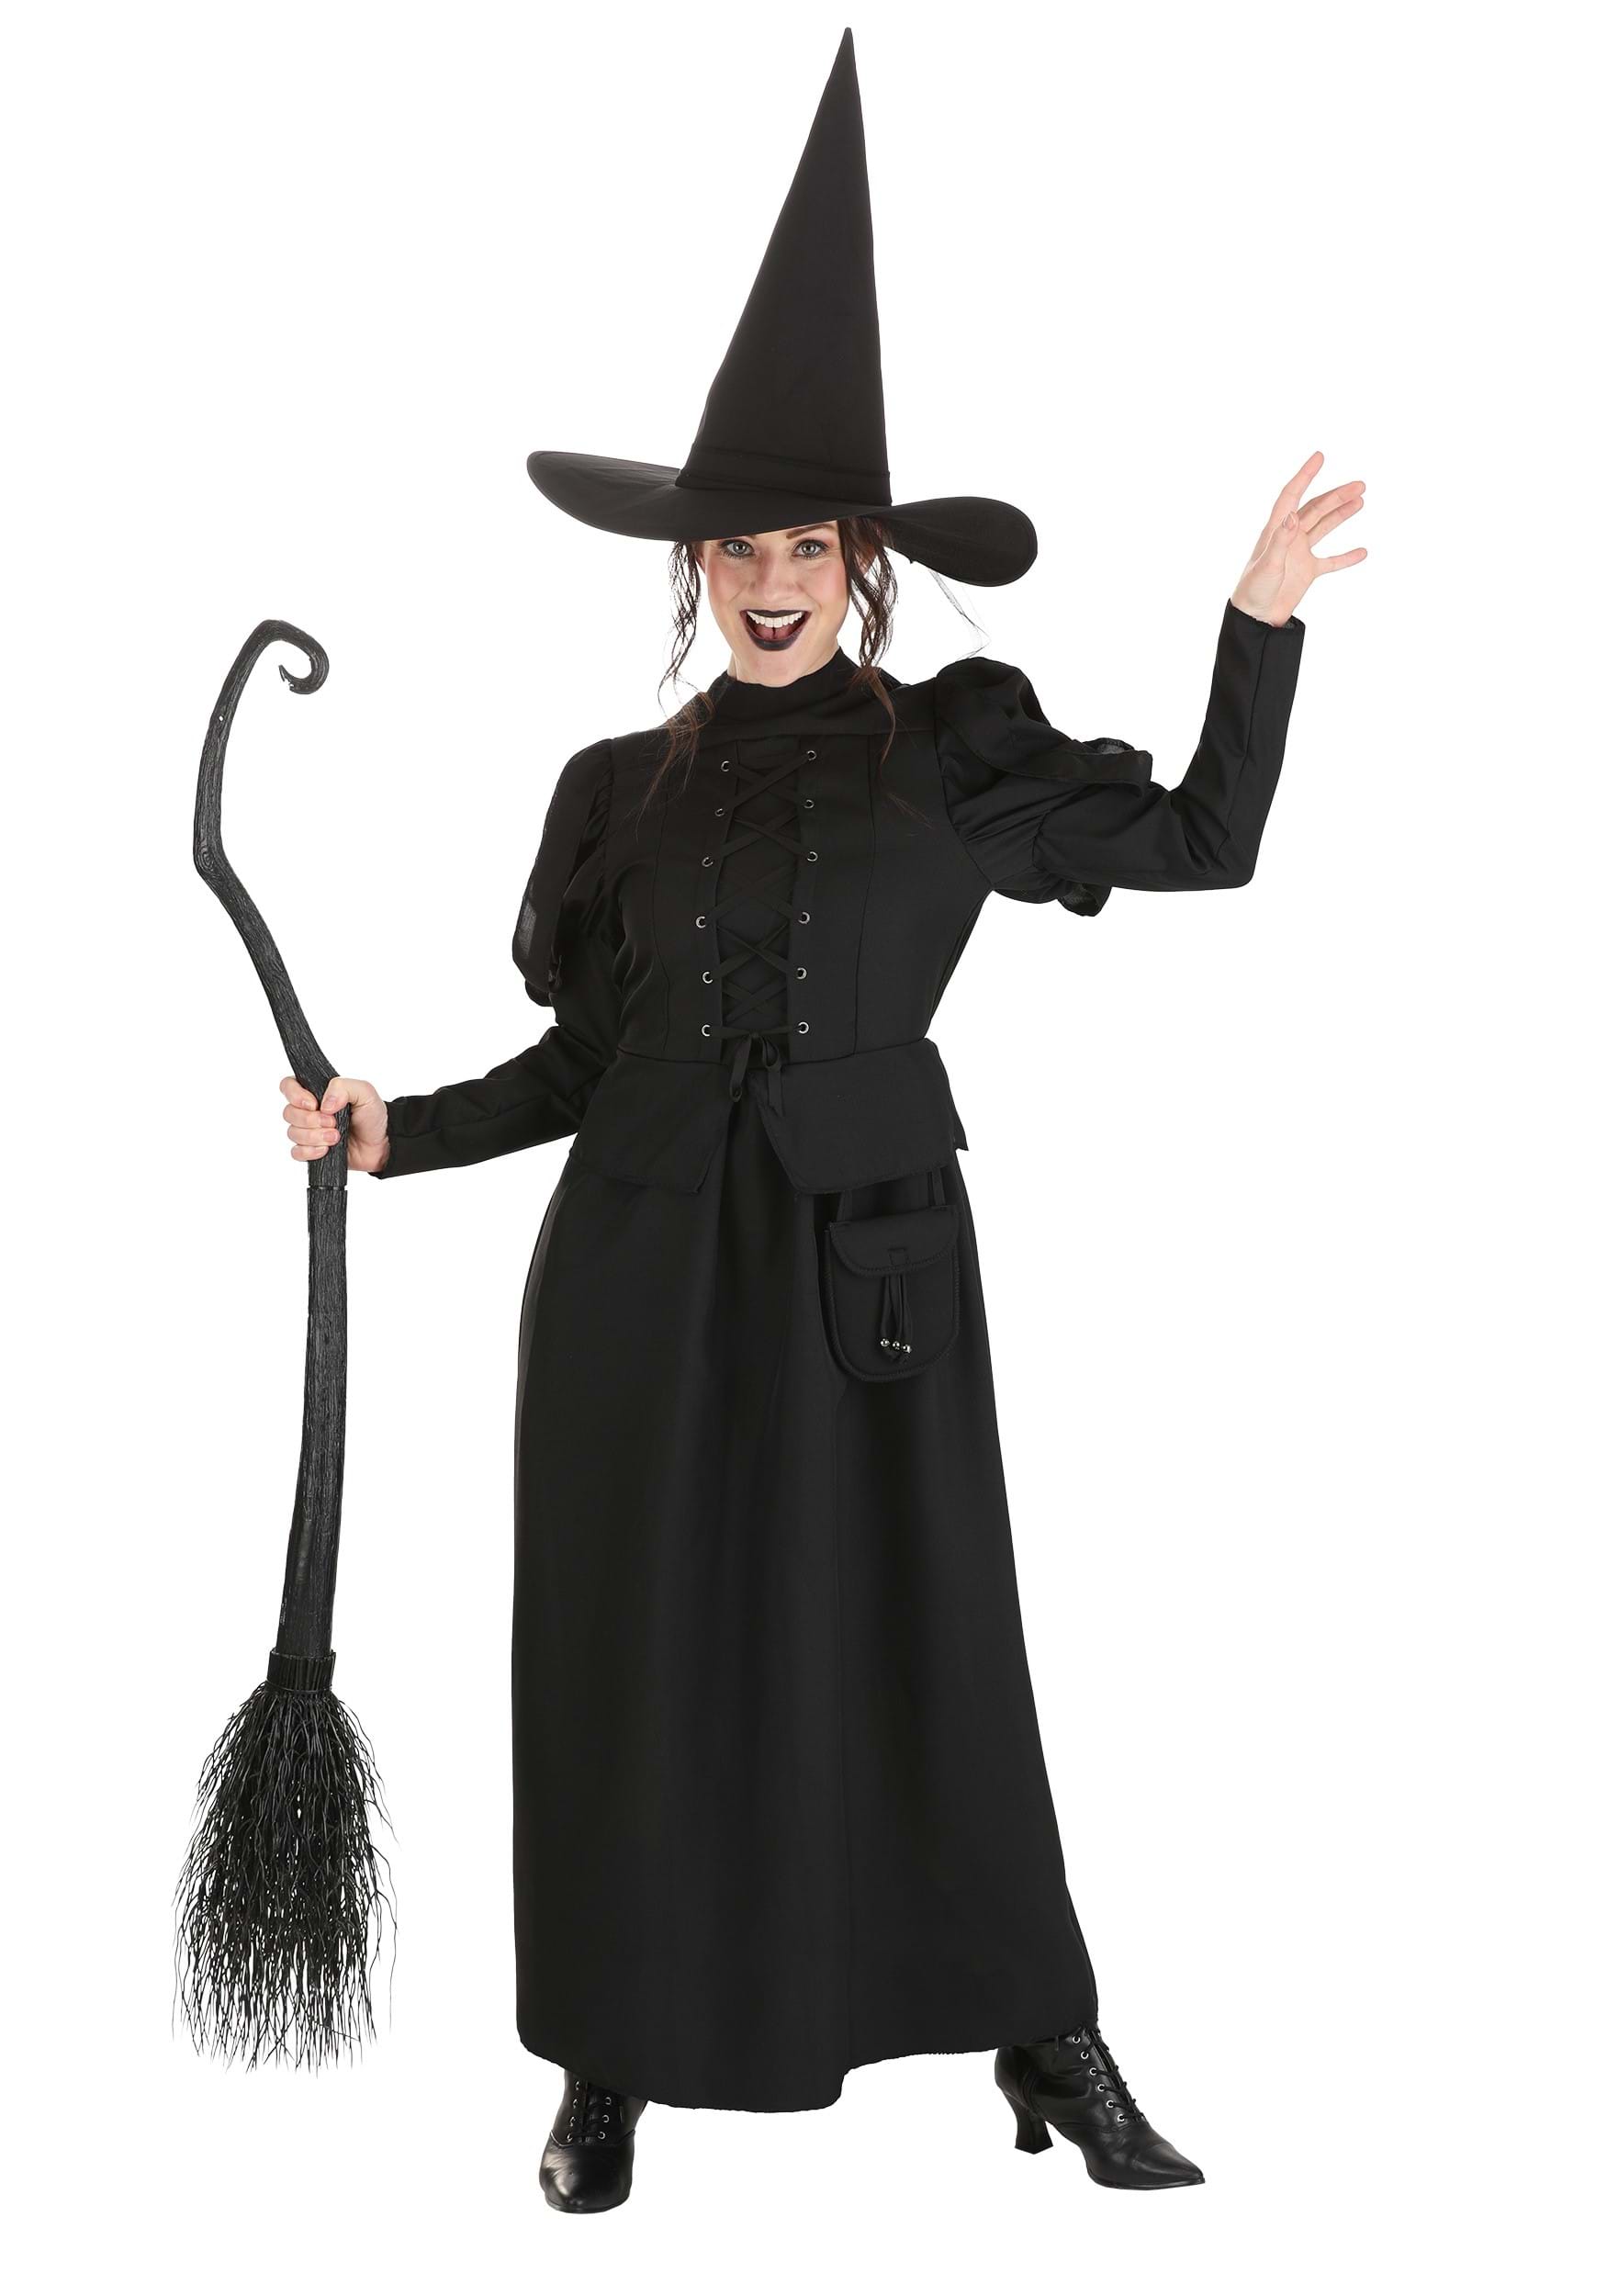 Image of Wizard of Oz Wicked Witch Costume for Women ID JLJLF1040AD-L